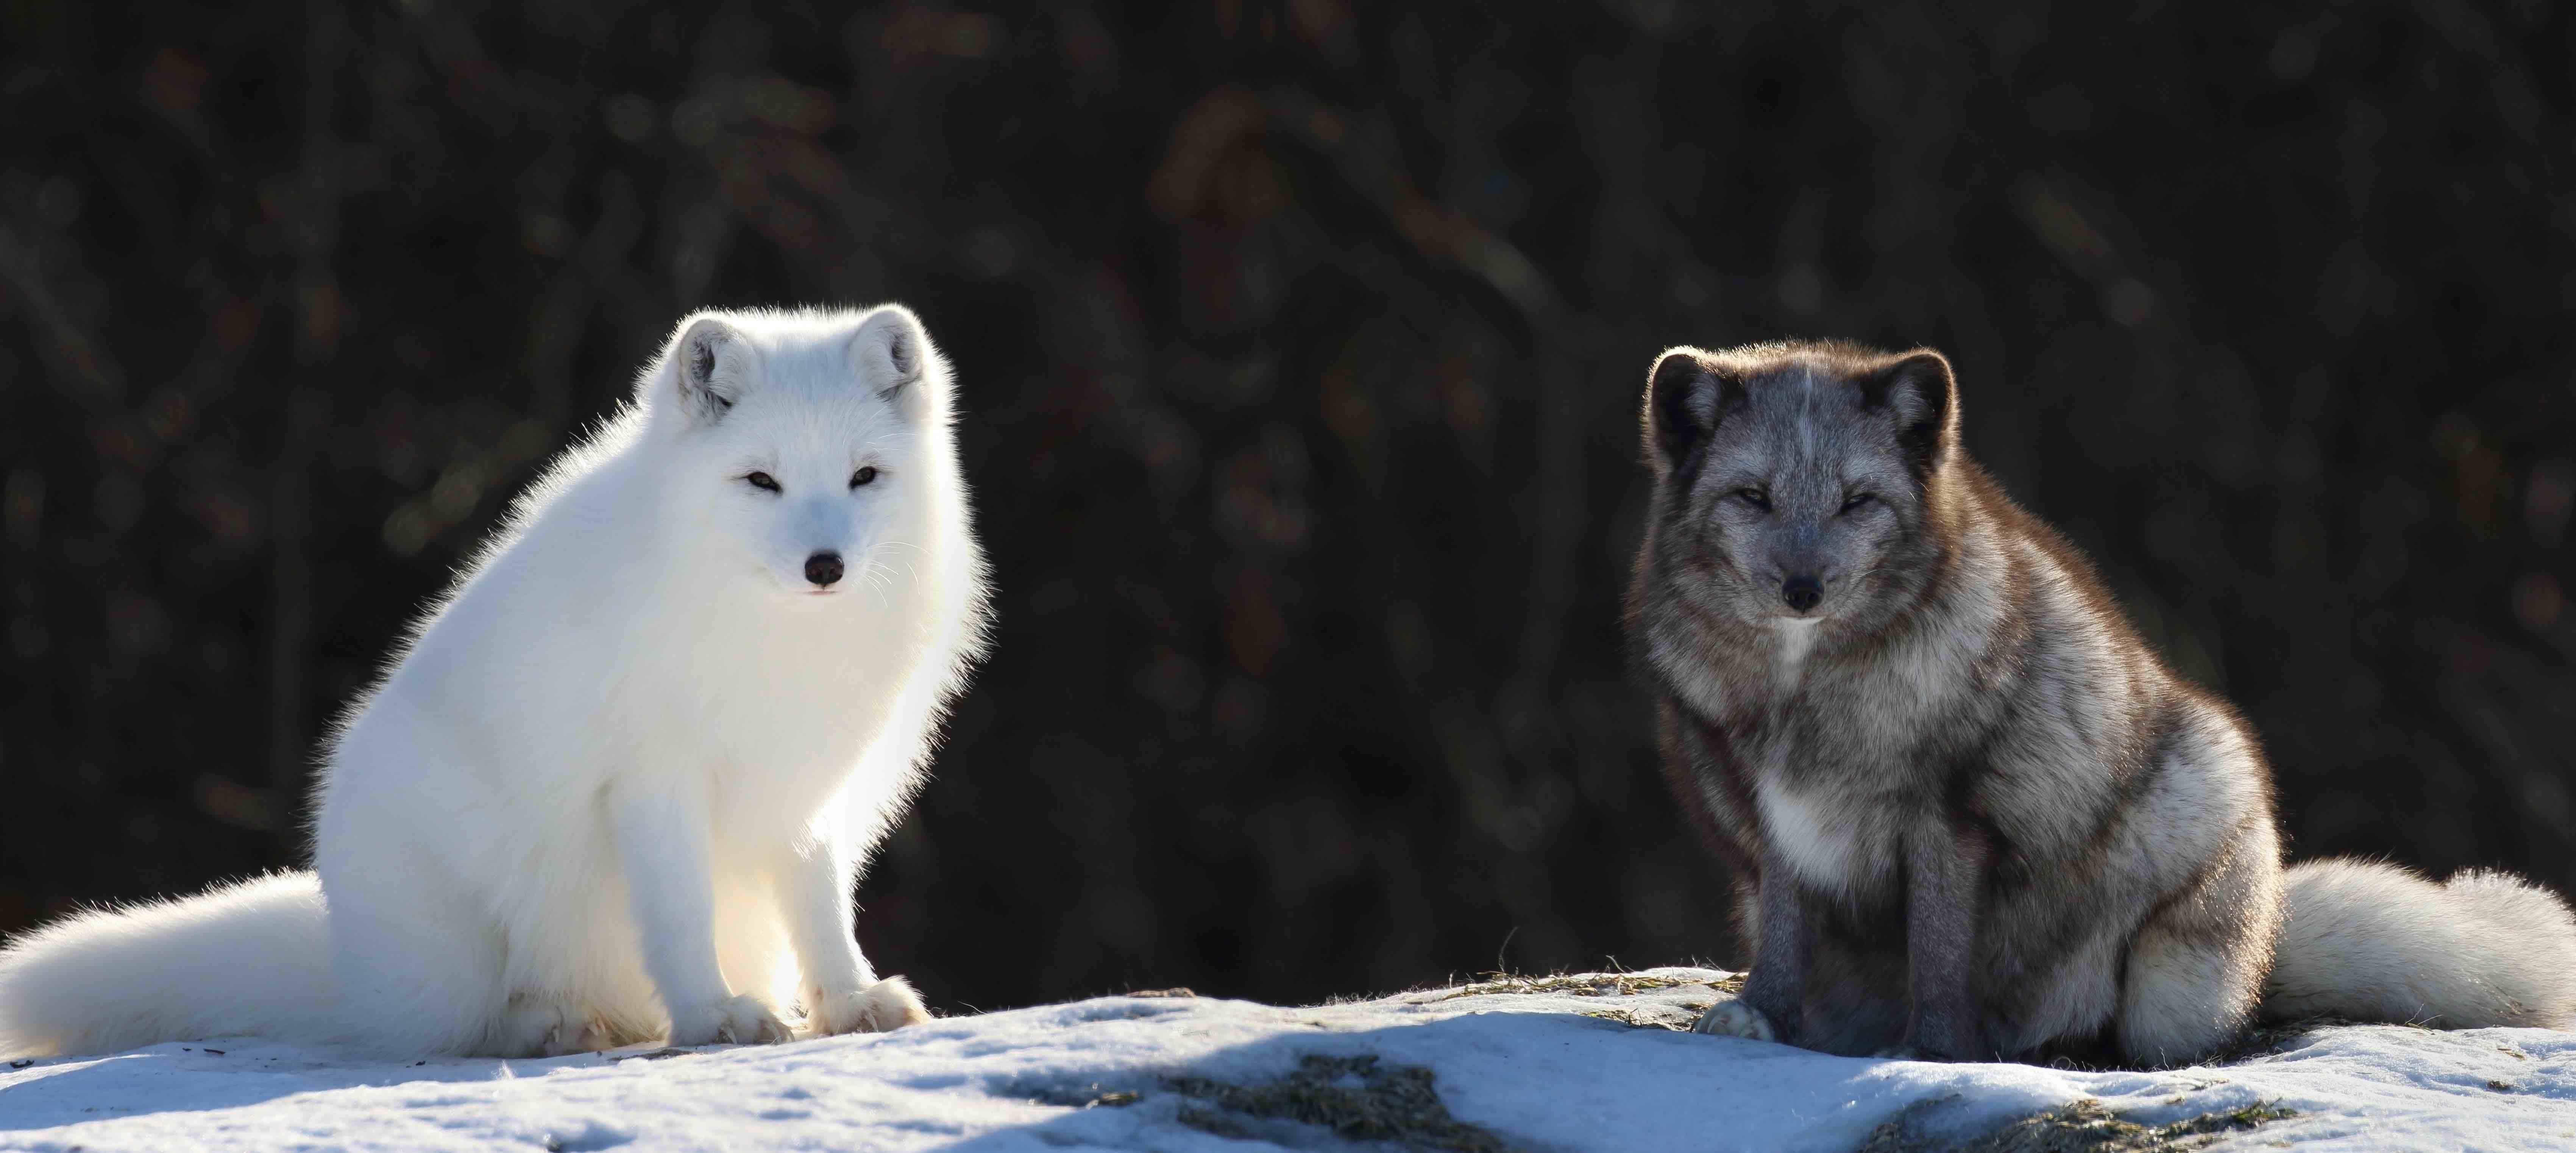 Arctic Fox Facts: 40 Frosty Facts About These Furry Foxes - Facts.Net